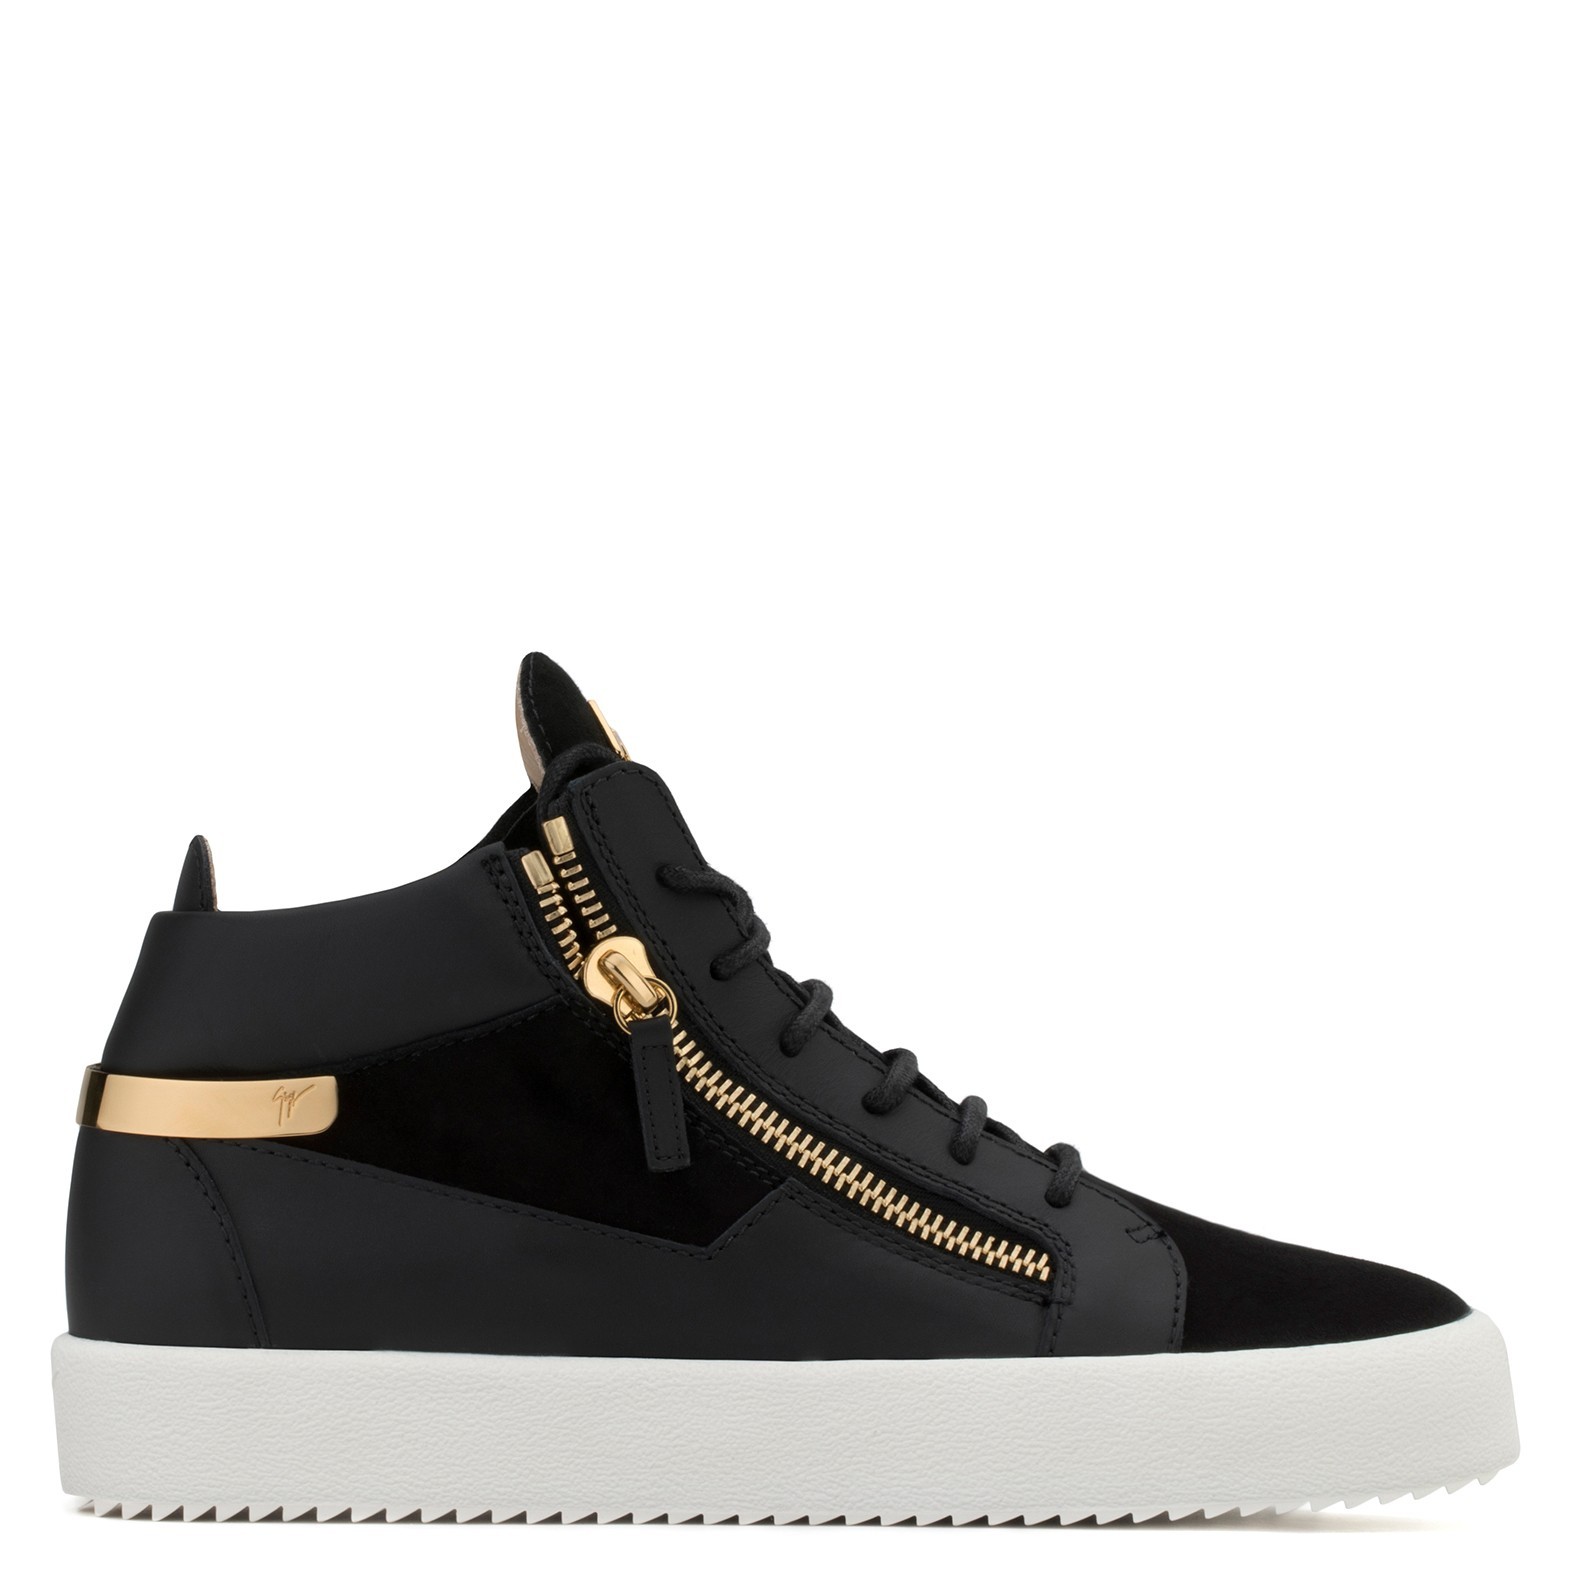 Giuseppe Zanotti Black Leather and suede mid-top sneaker | ShoeSales